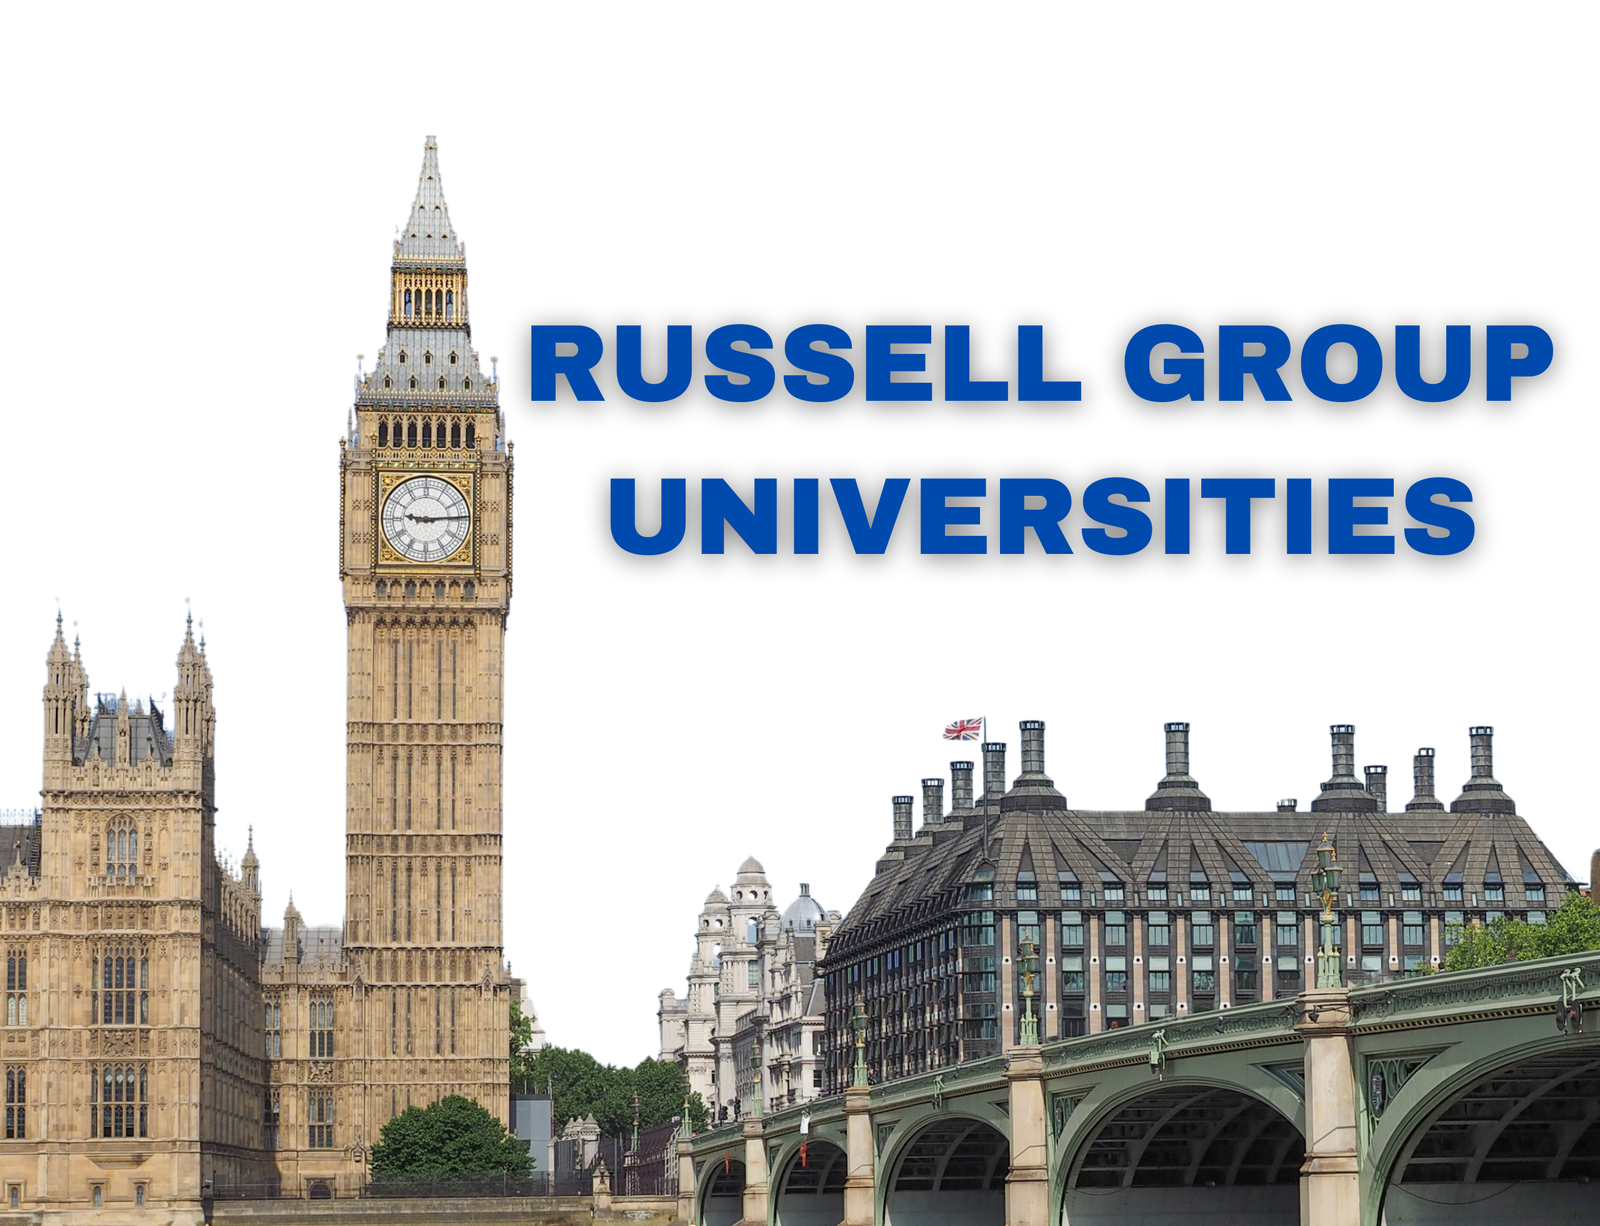 Russell Group Universities: The Prestige and the Promise